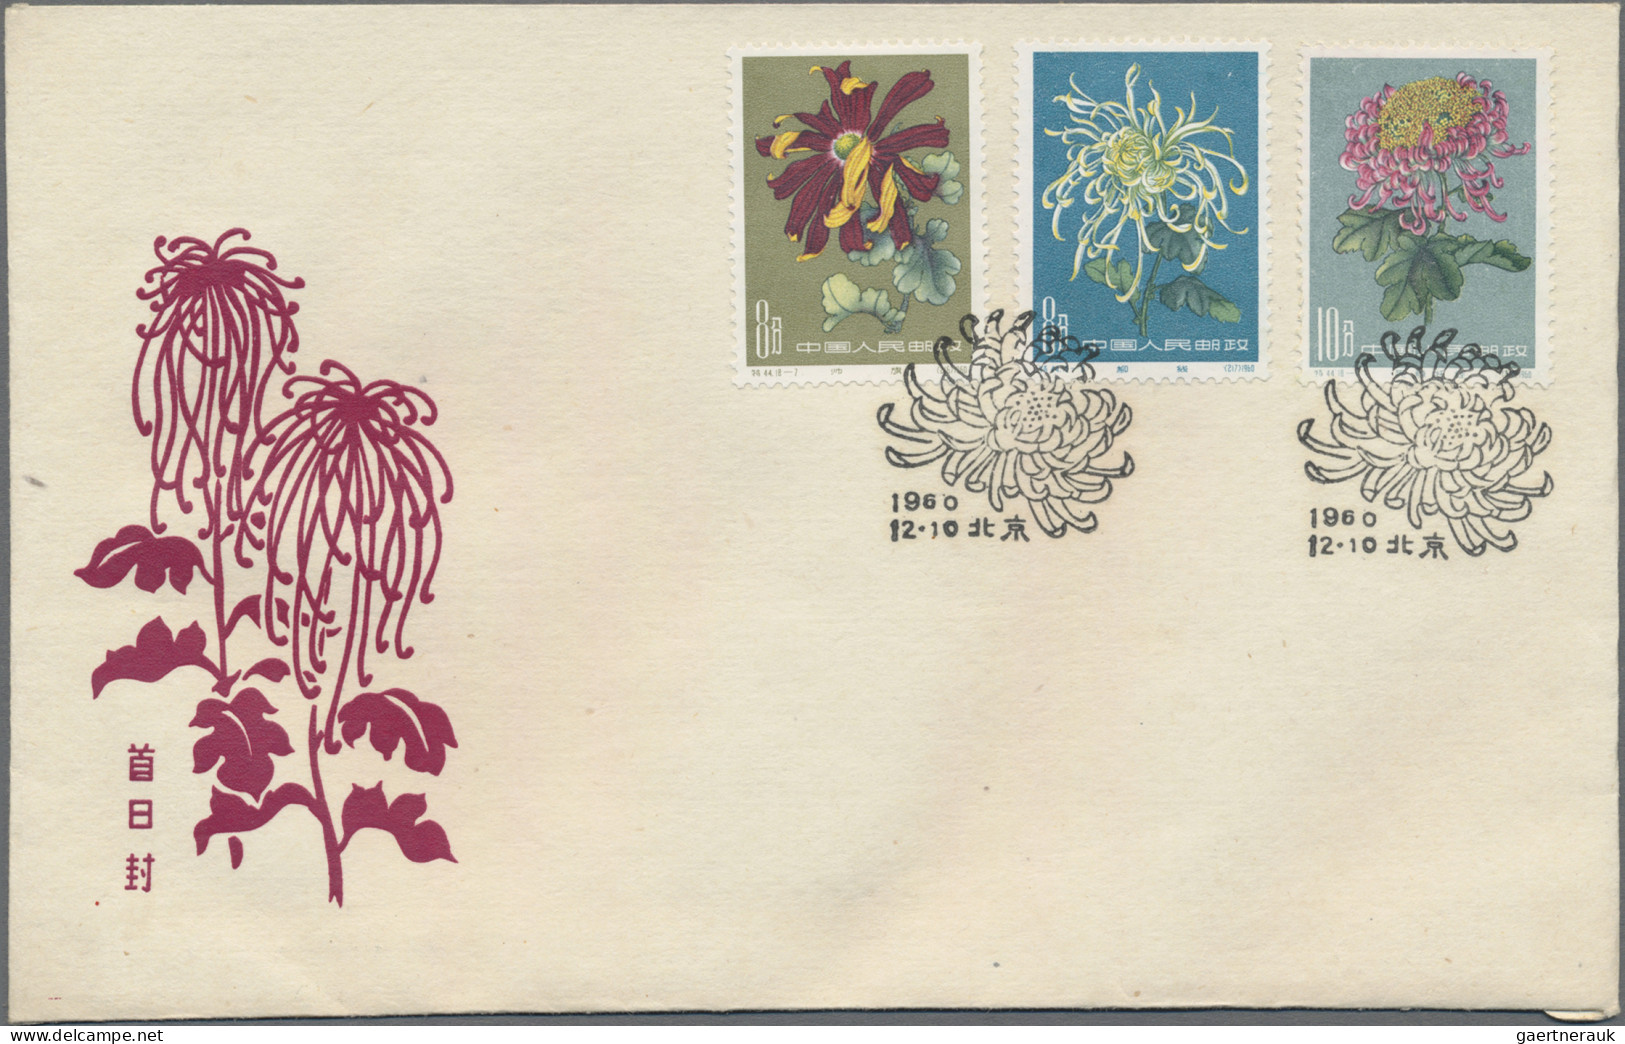 China (PRC): 1960/61, Chrysanthemum (S44), six unaddressed cacheted official FDC